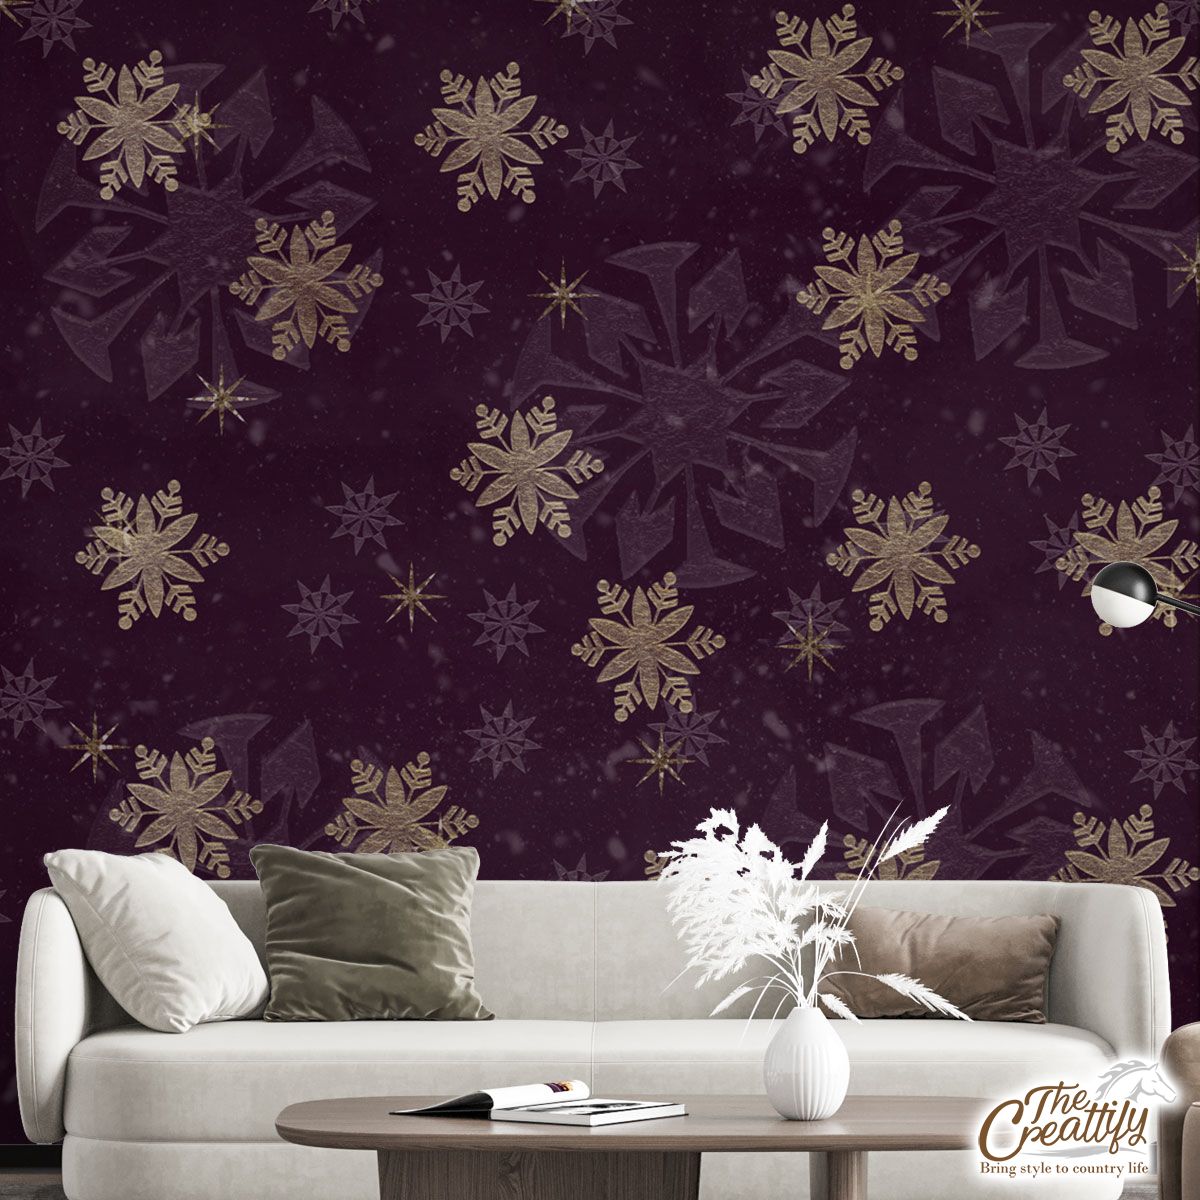 Snowflake On Dark Red Background Wall Mural